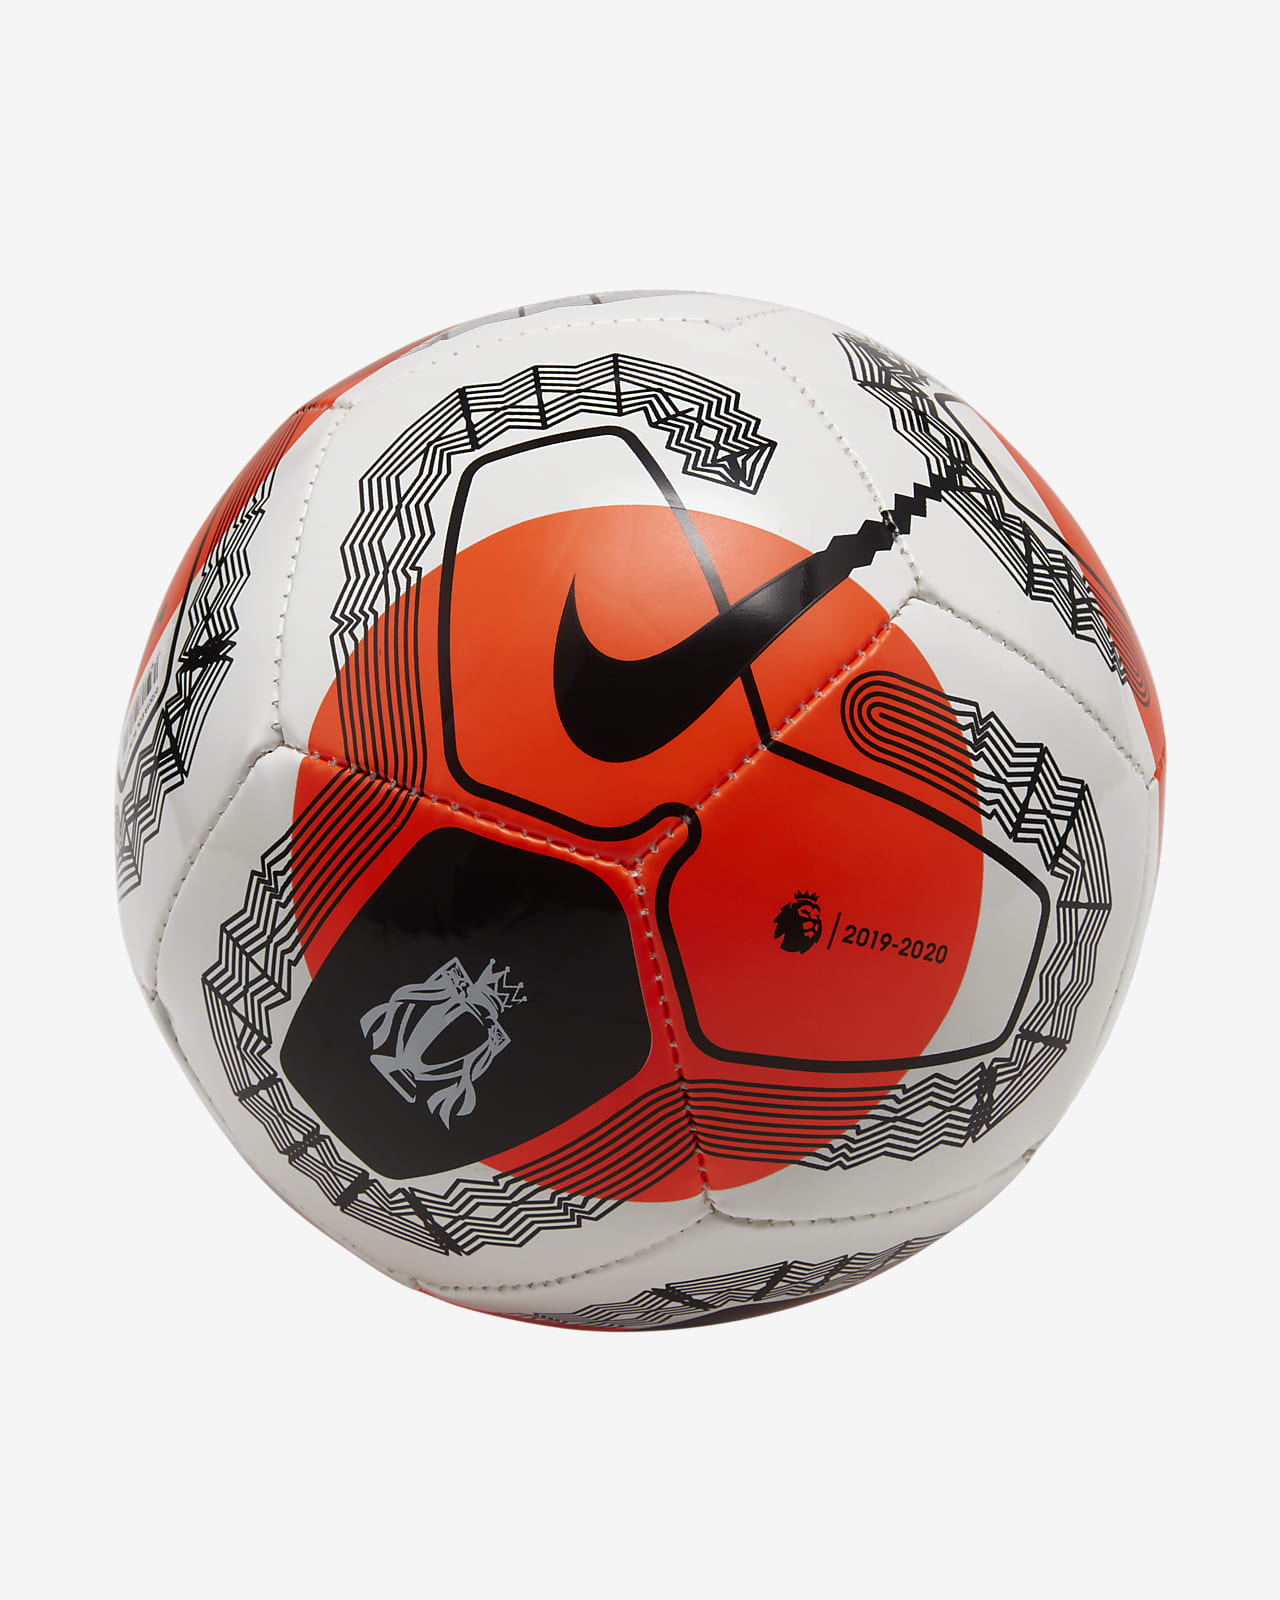 epl ball size